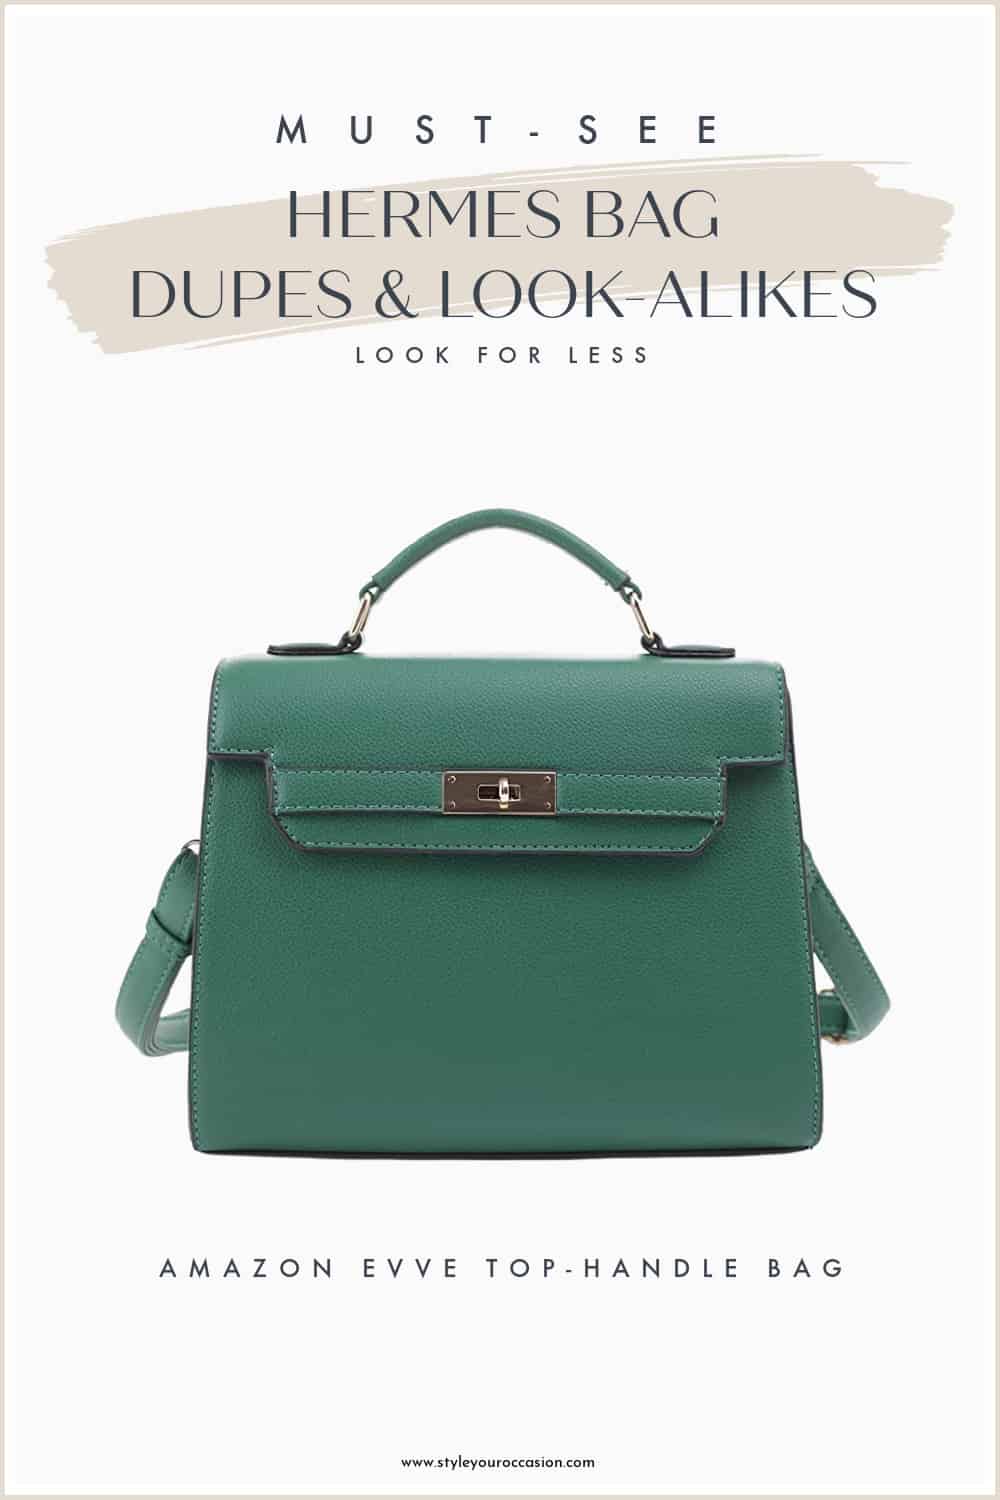 an image board of a green leather top handle Hermes look-alike purse from Amazon